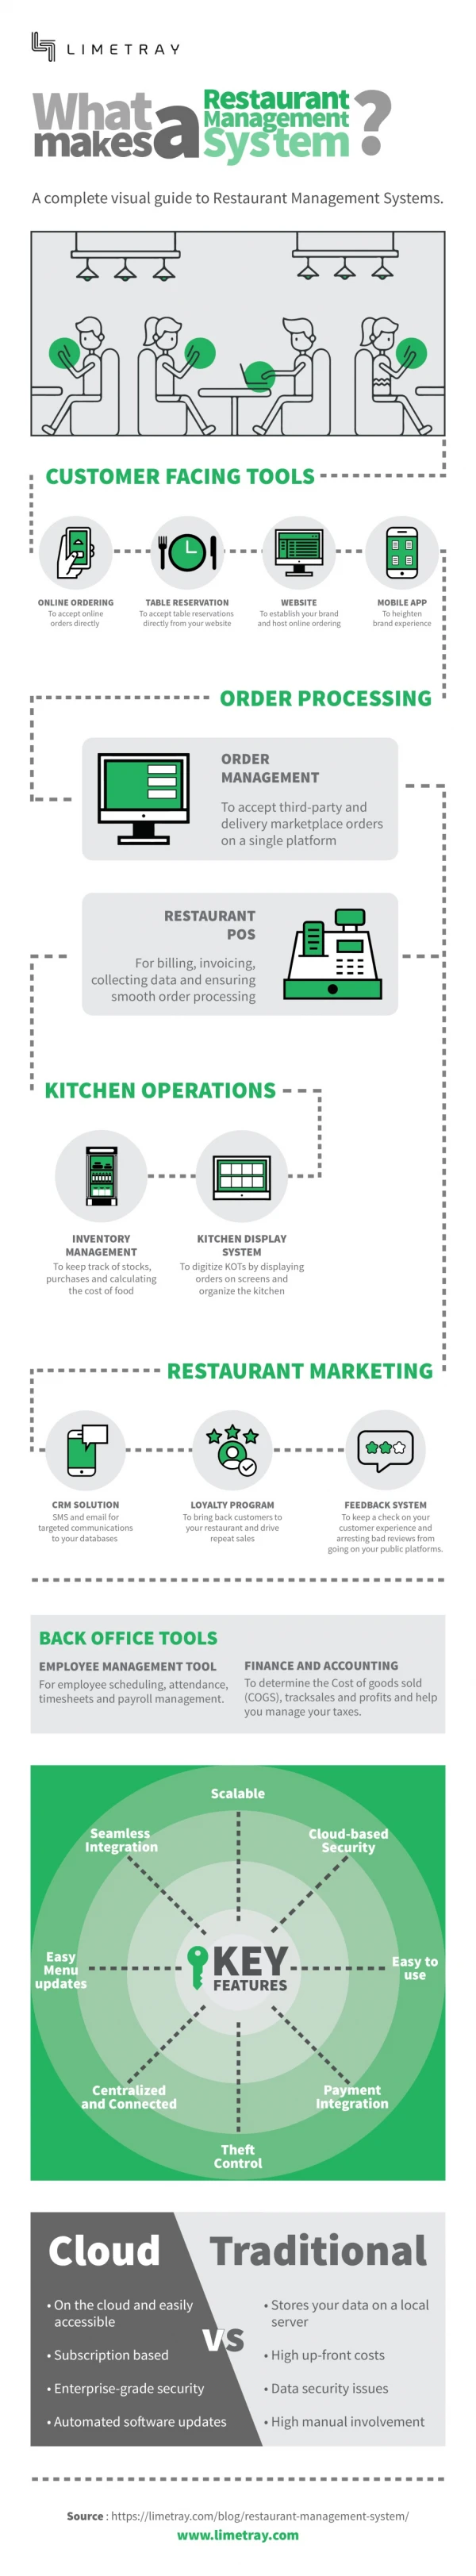 A Complete Guide To Restaurant Management Systems